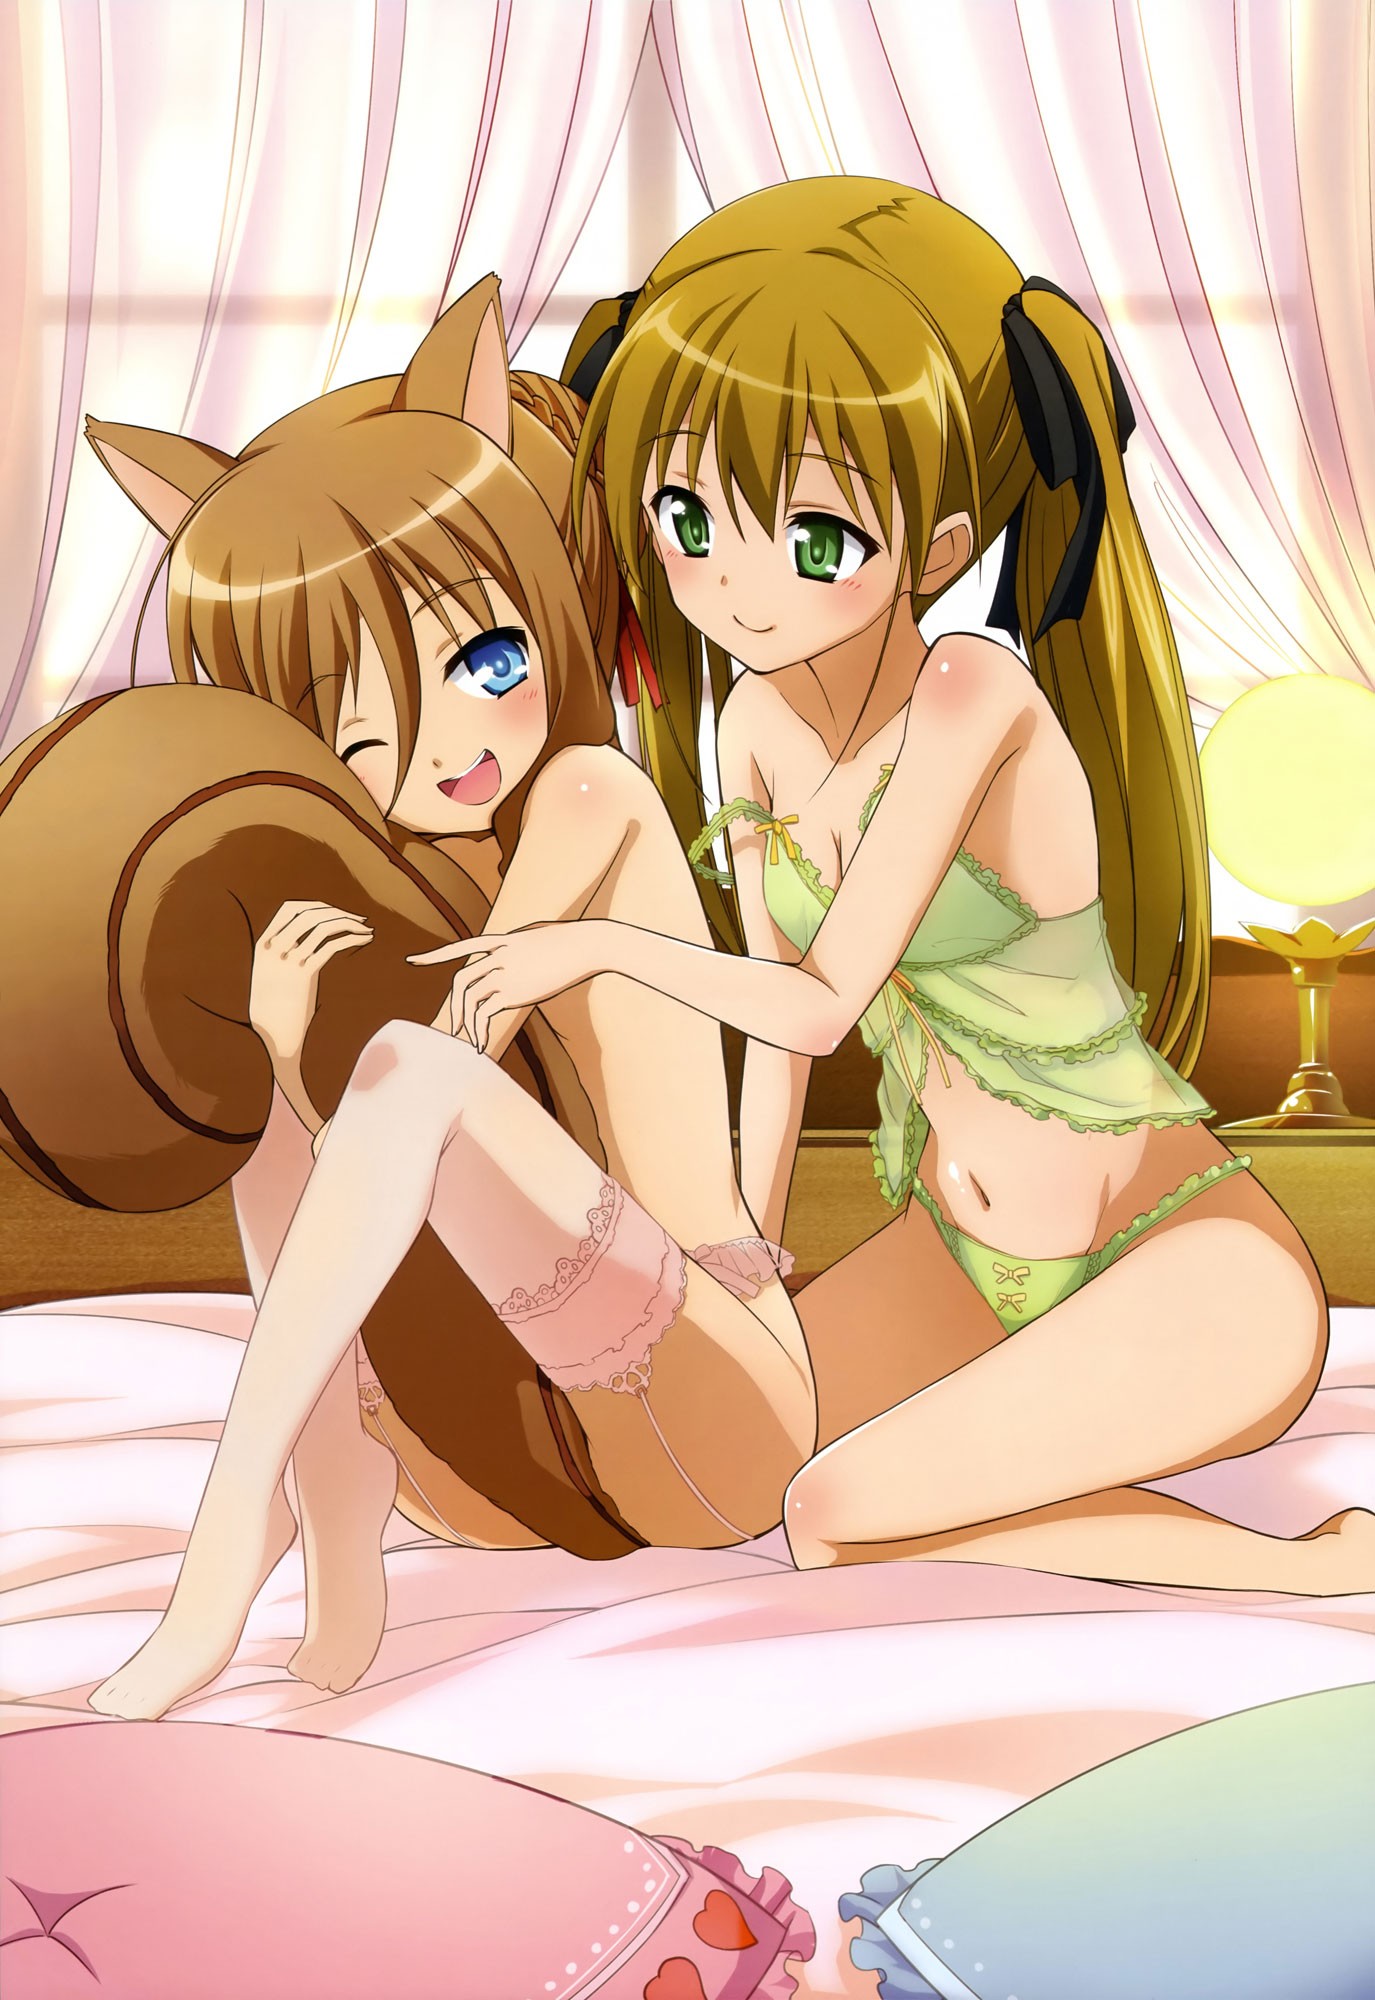 Anime 1375x2000 Dog Days anime anime girls Couvert Eschenbach Pastillage Rebecca Anderson two women green eyes blue eyes underwear panties stockings smiling lingerie